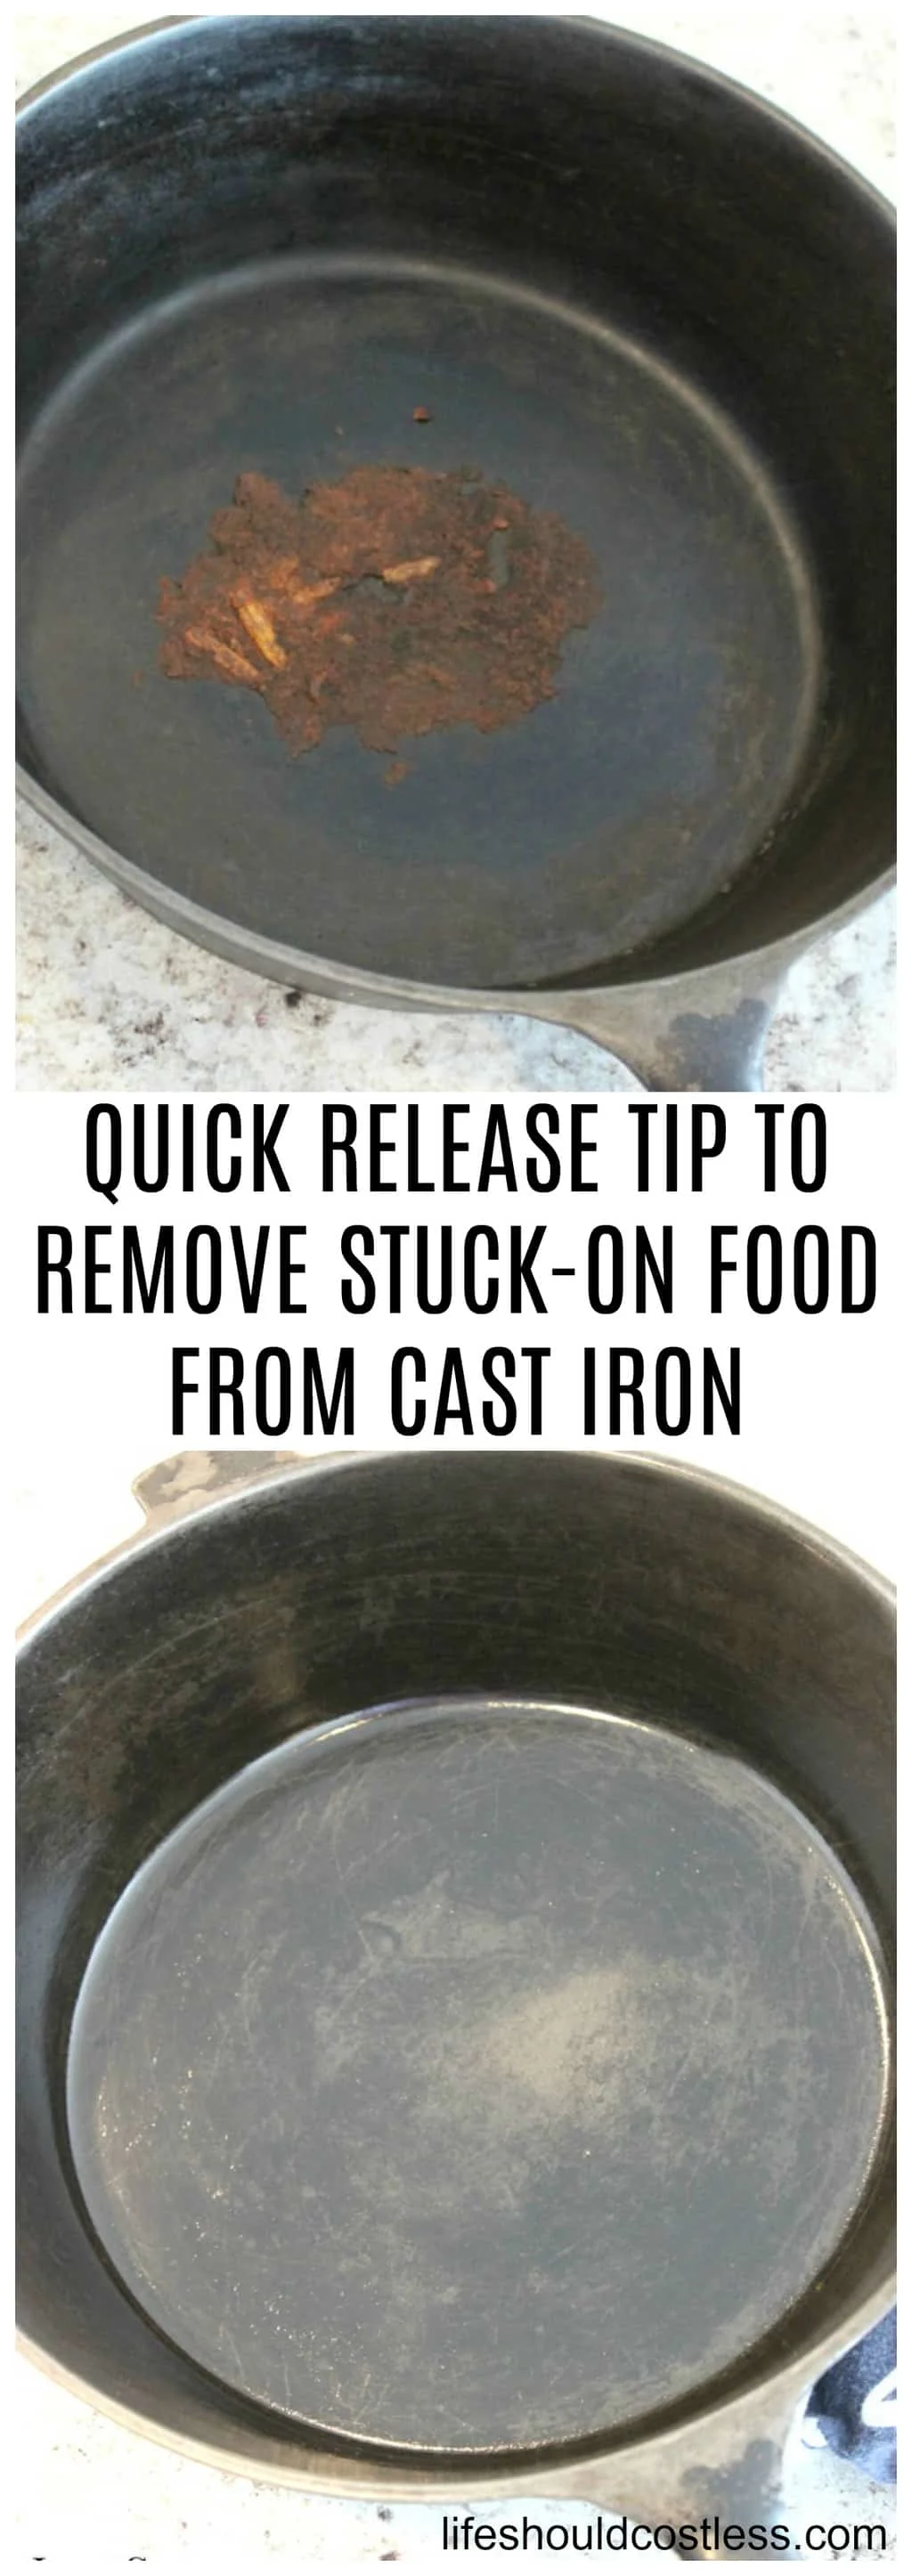 QUICK RELEASE TIP TO REMOVE STUCK-ON FOOD FROM CAST IRON. Easy cast iron care cleaning tip.